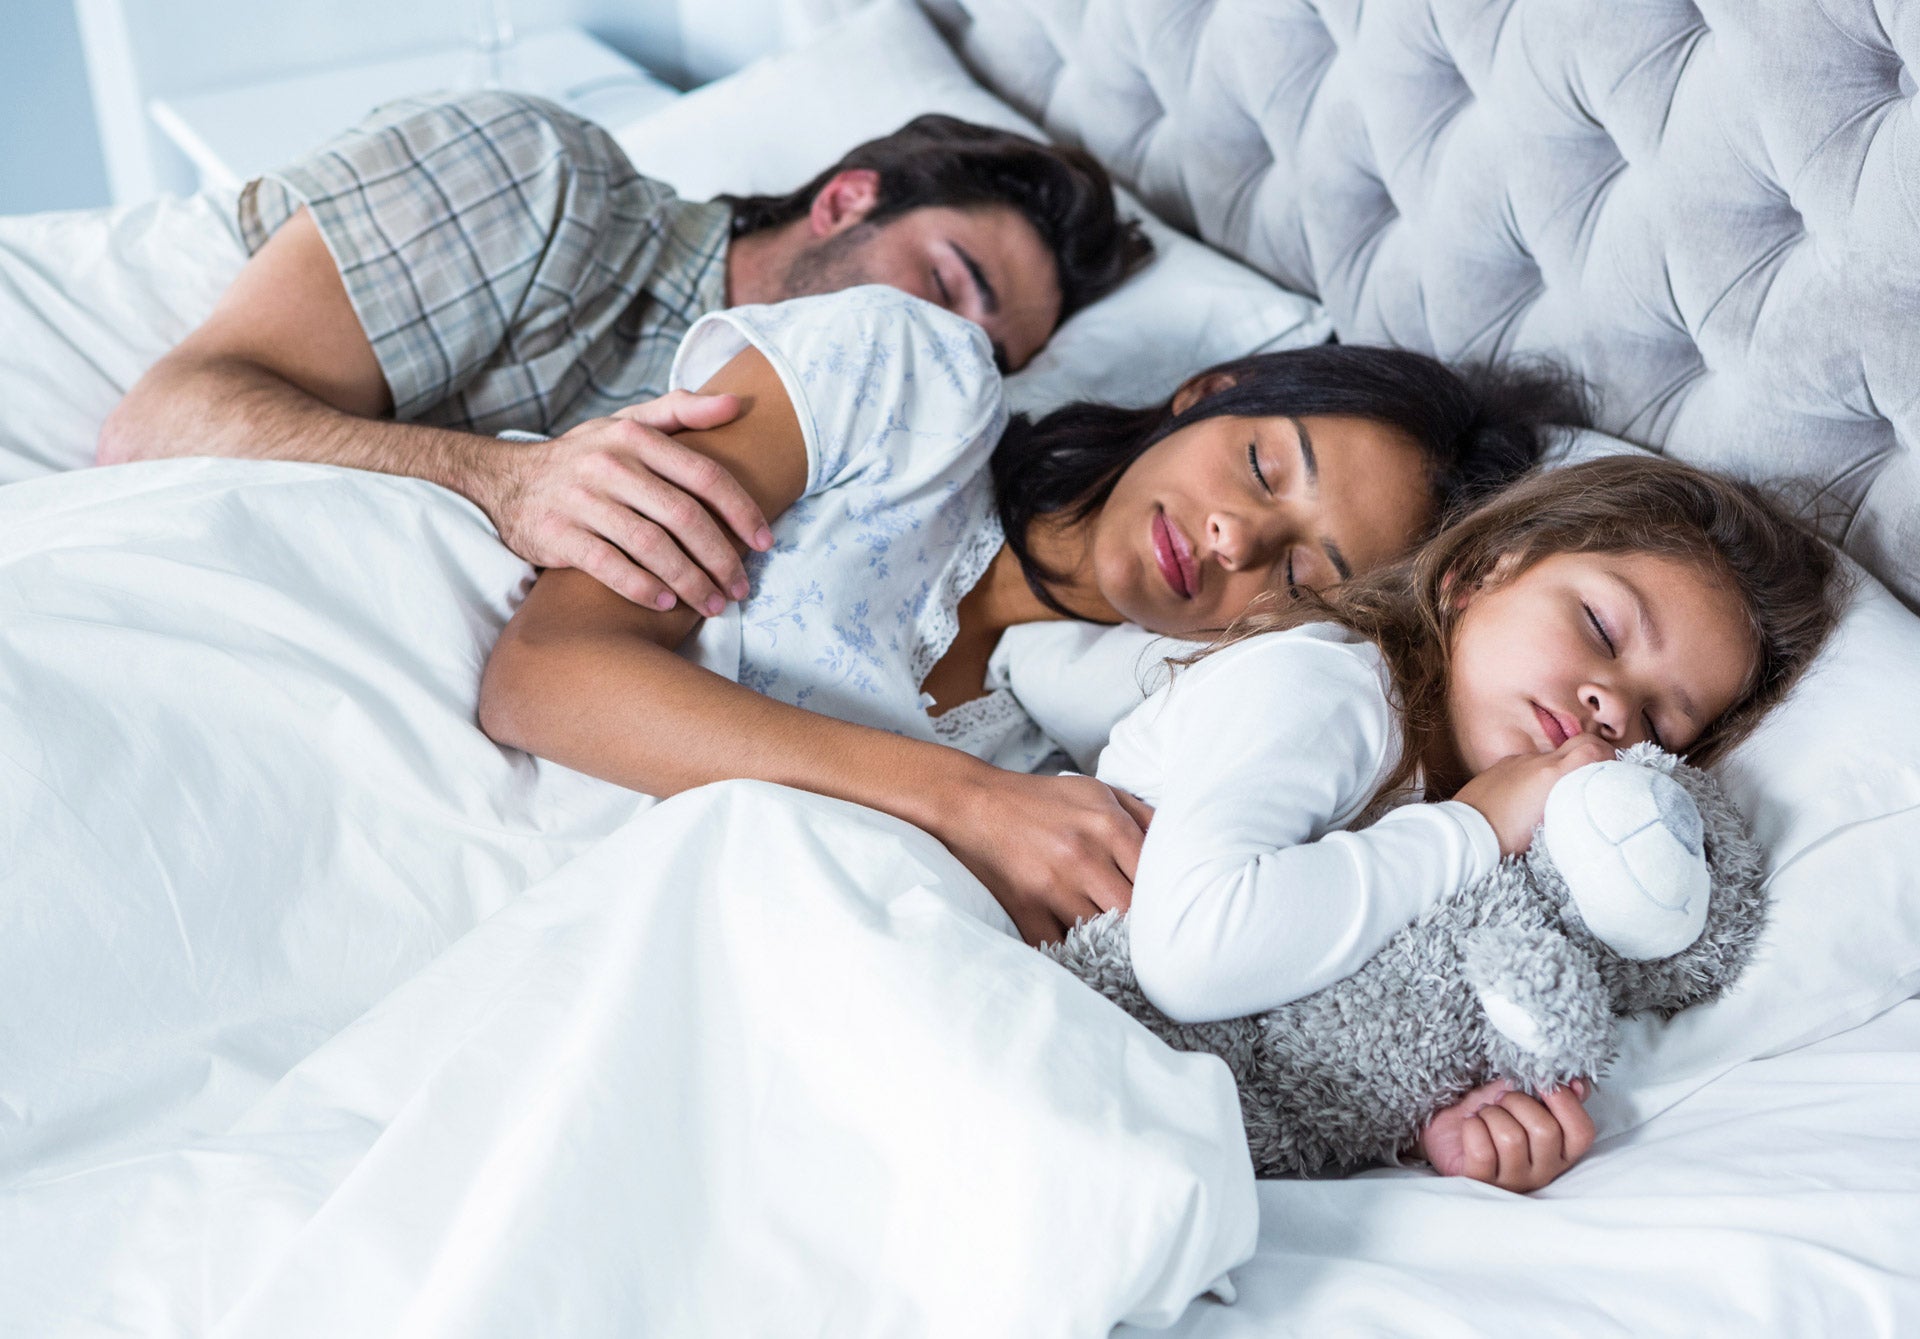 Mother, father and small child sleeping peacefully in the same bed